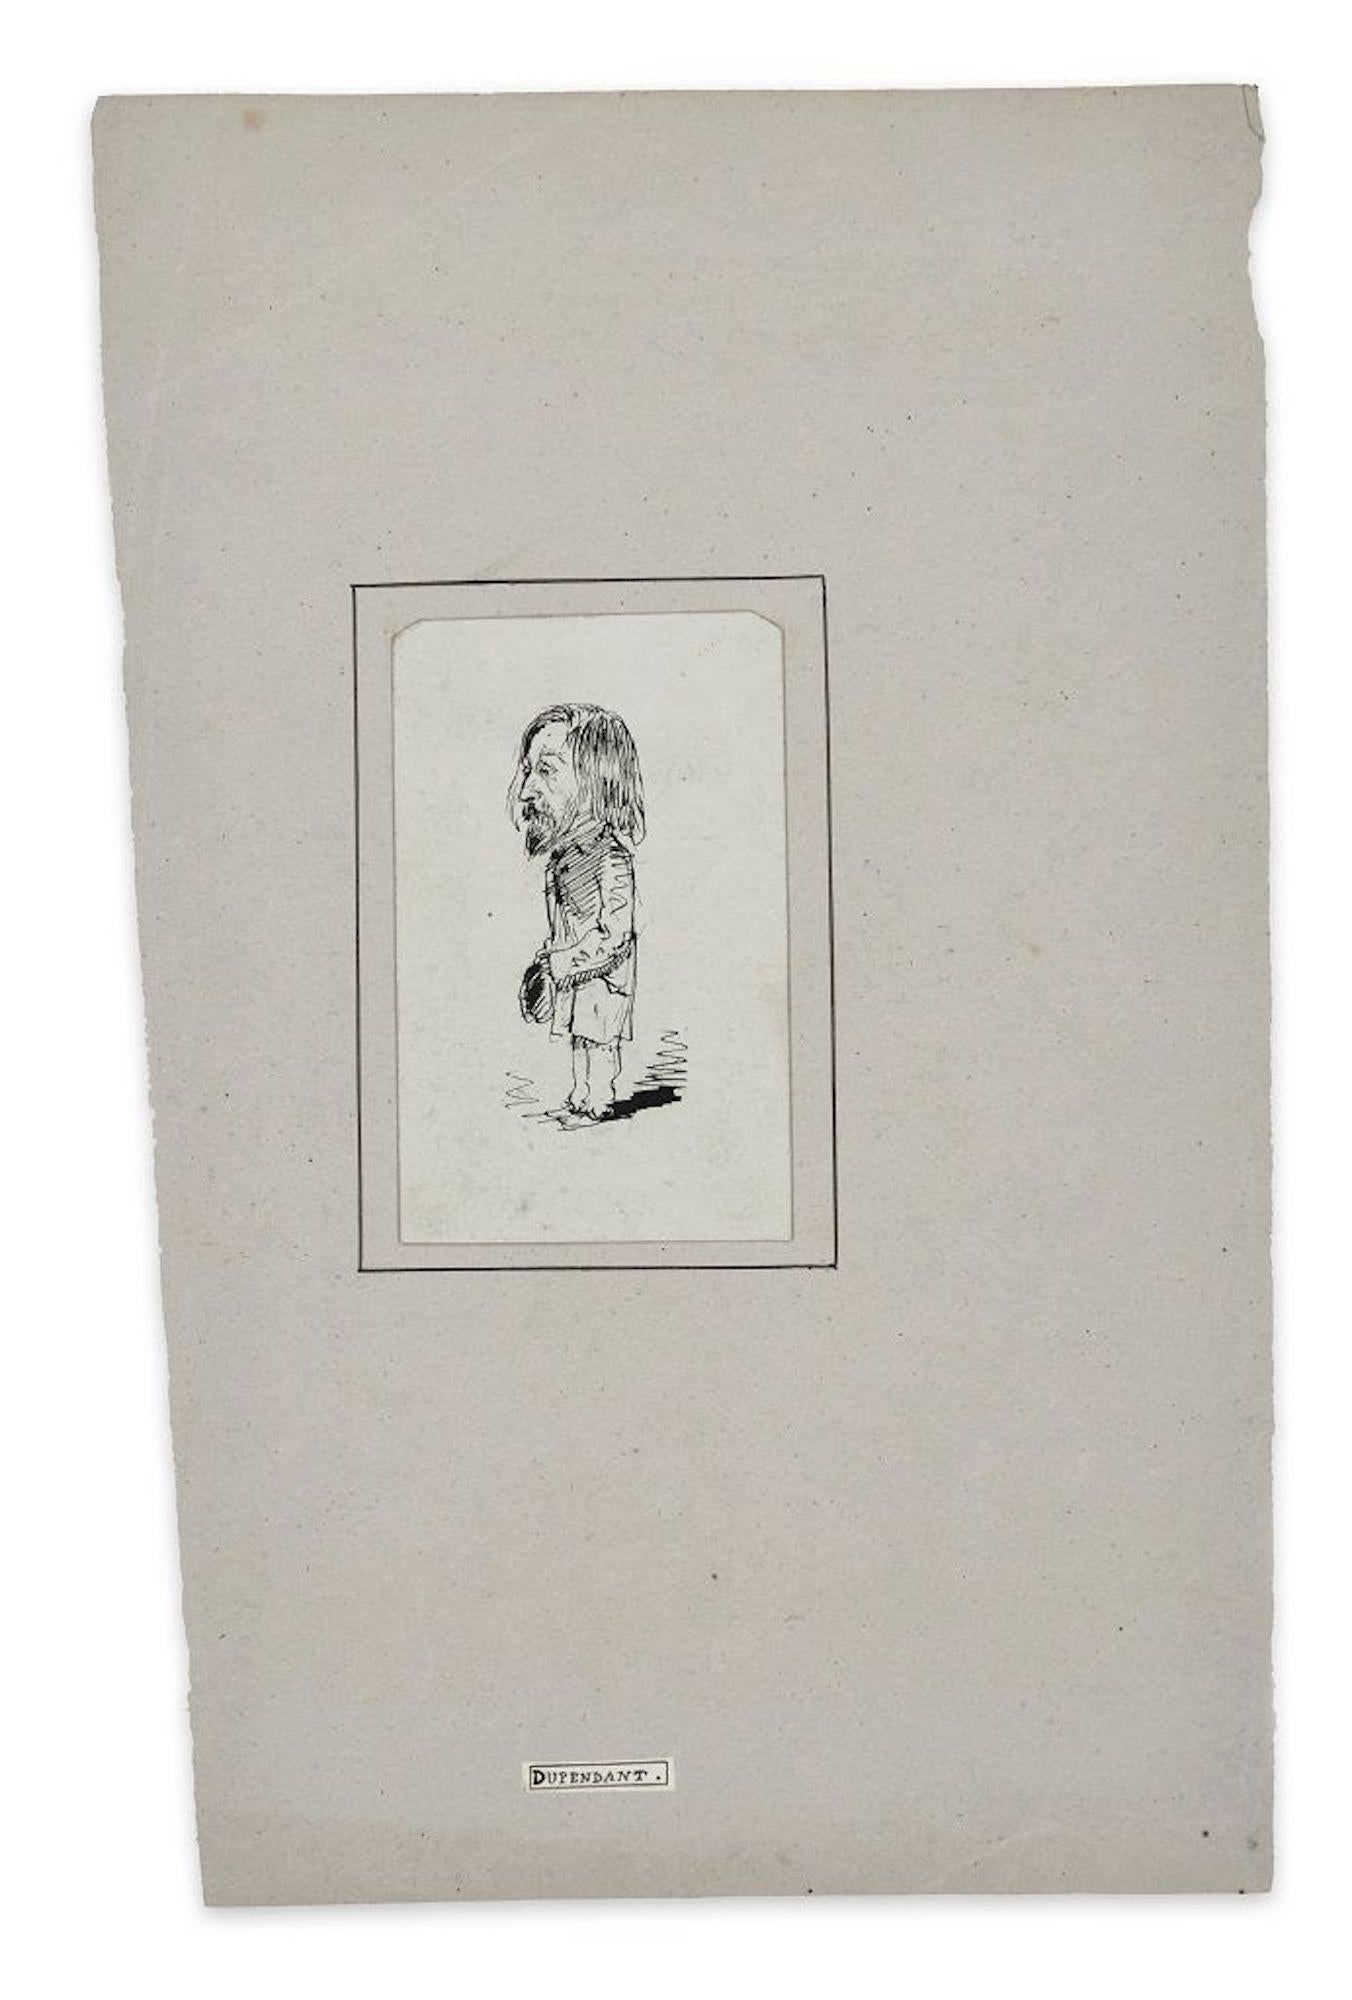 Dupendant - Original Pen Drawing by Unknot French Artist End of 19th Century - Gray Figurative Art by Unknown